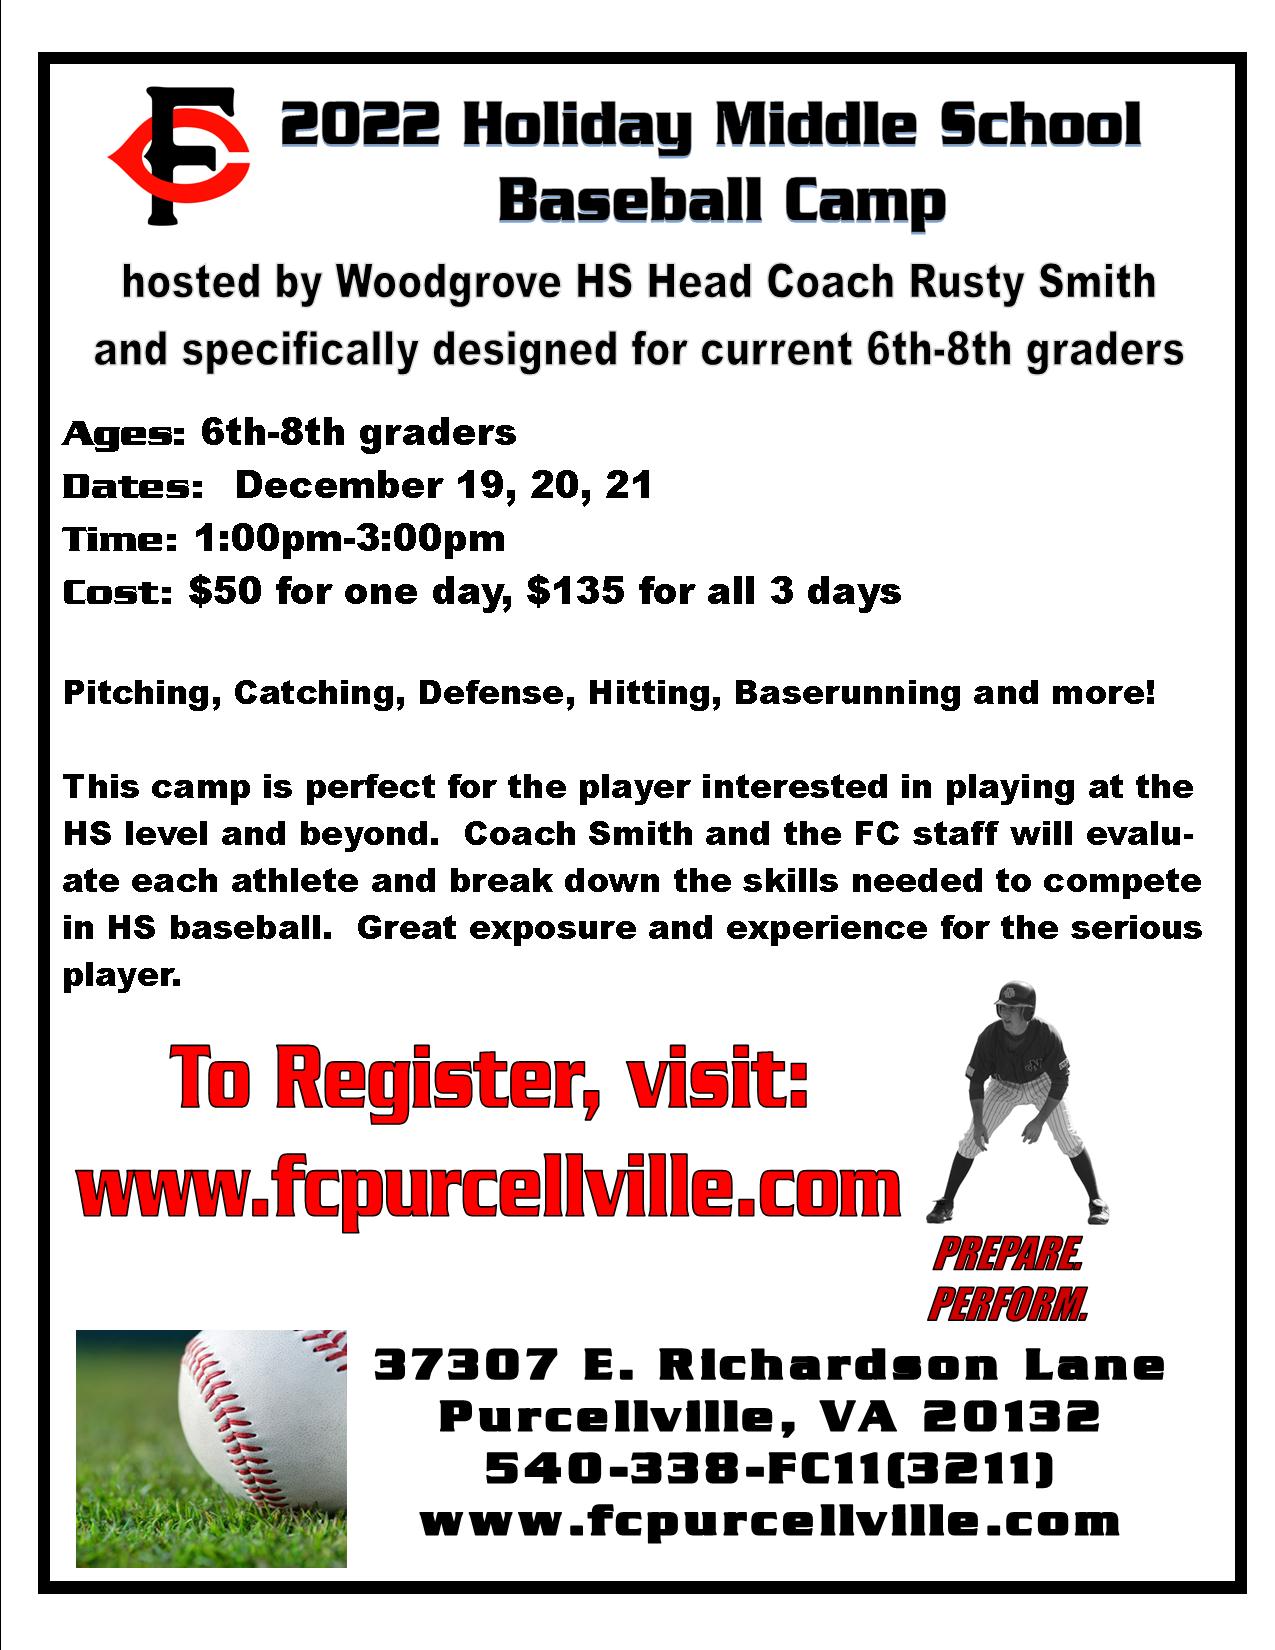 Coach Smith's Holiday Middle School Showcase Camp